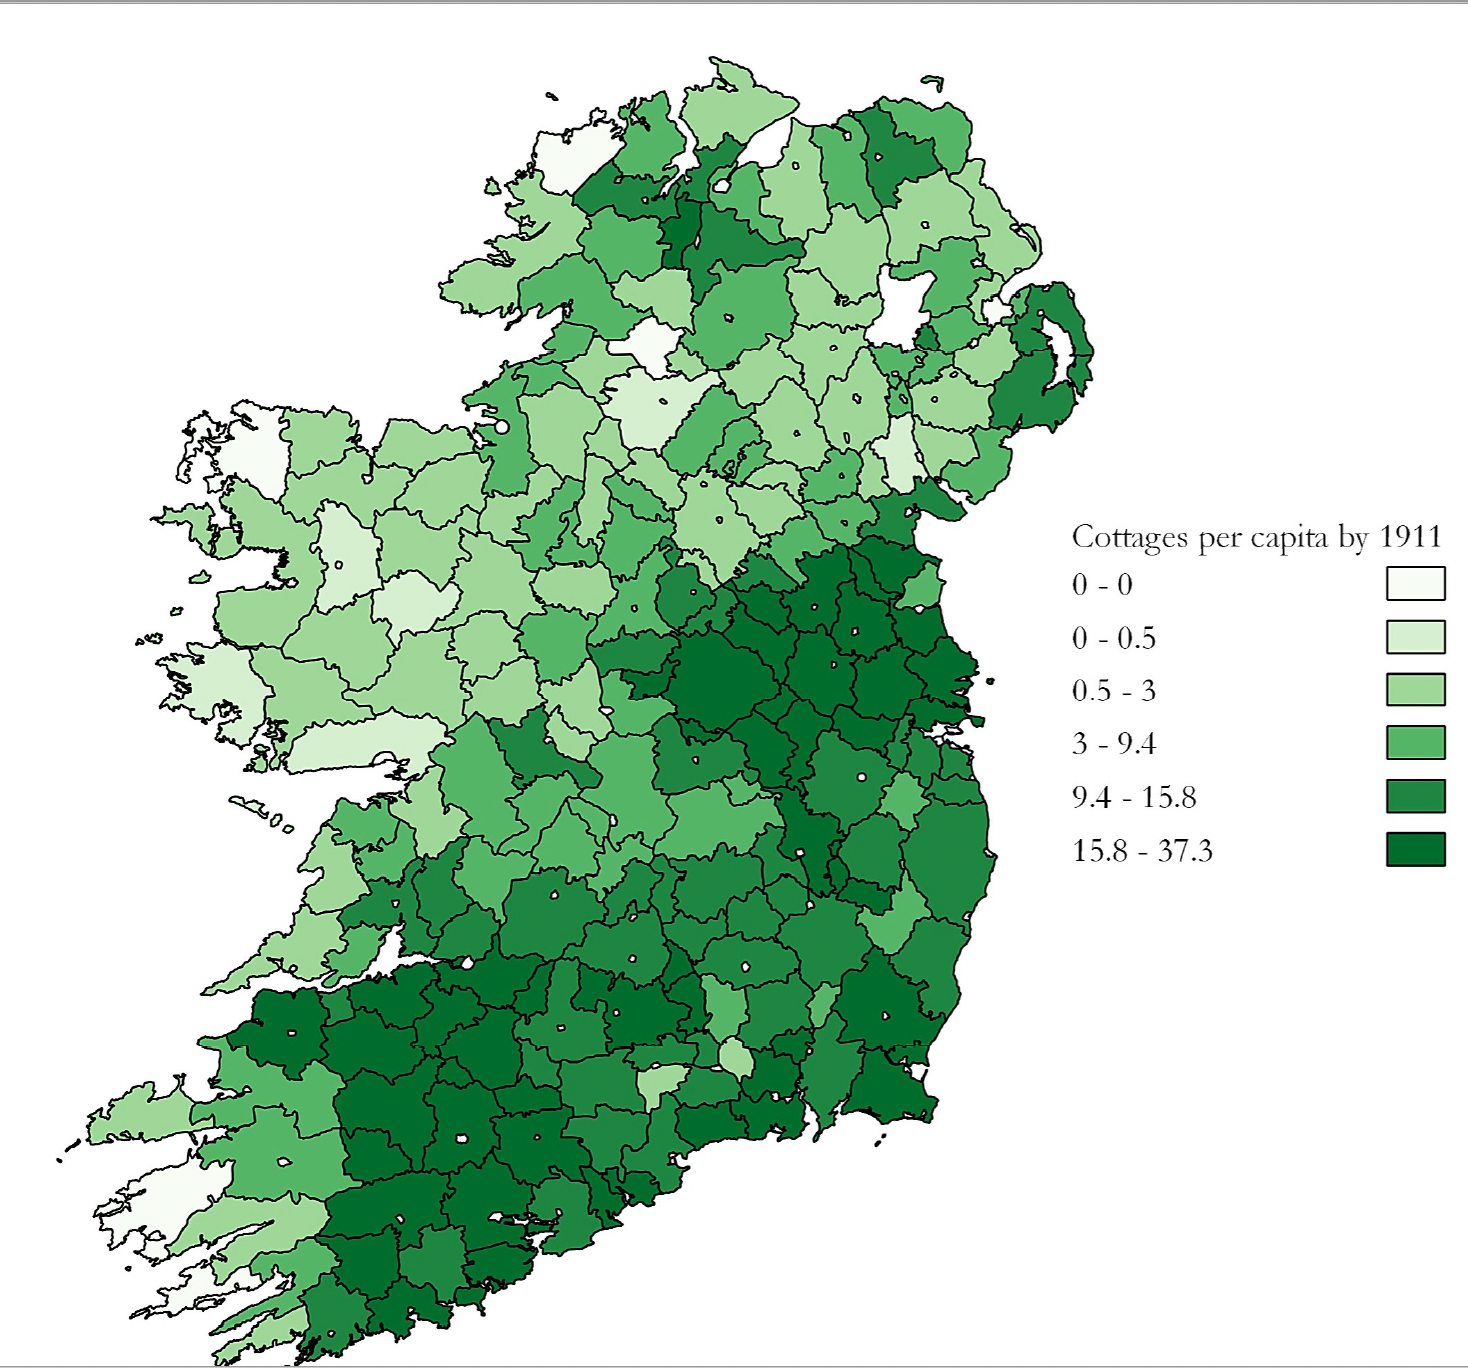 The impact of social housing on population in Ireland since 1911 2